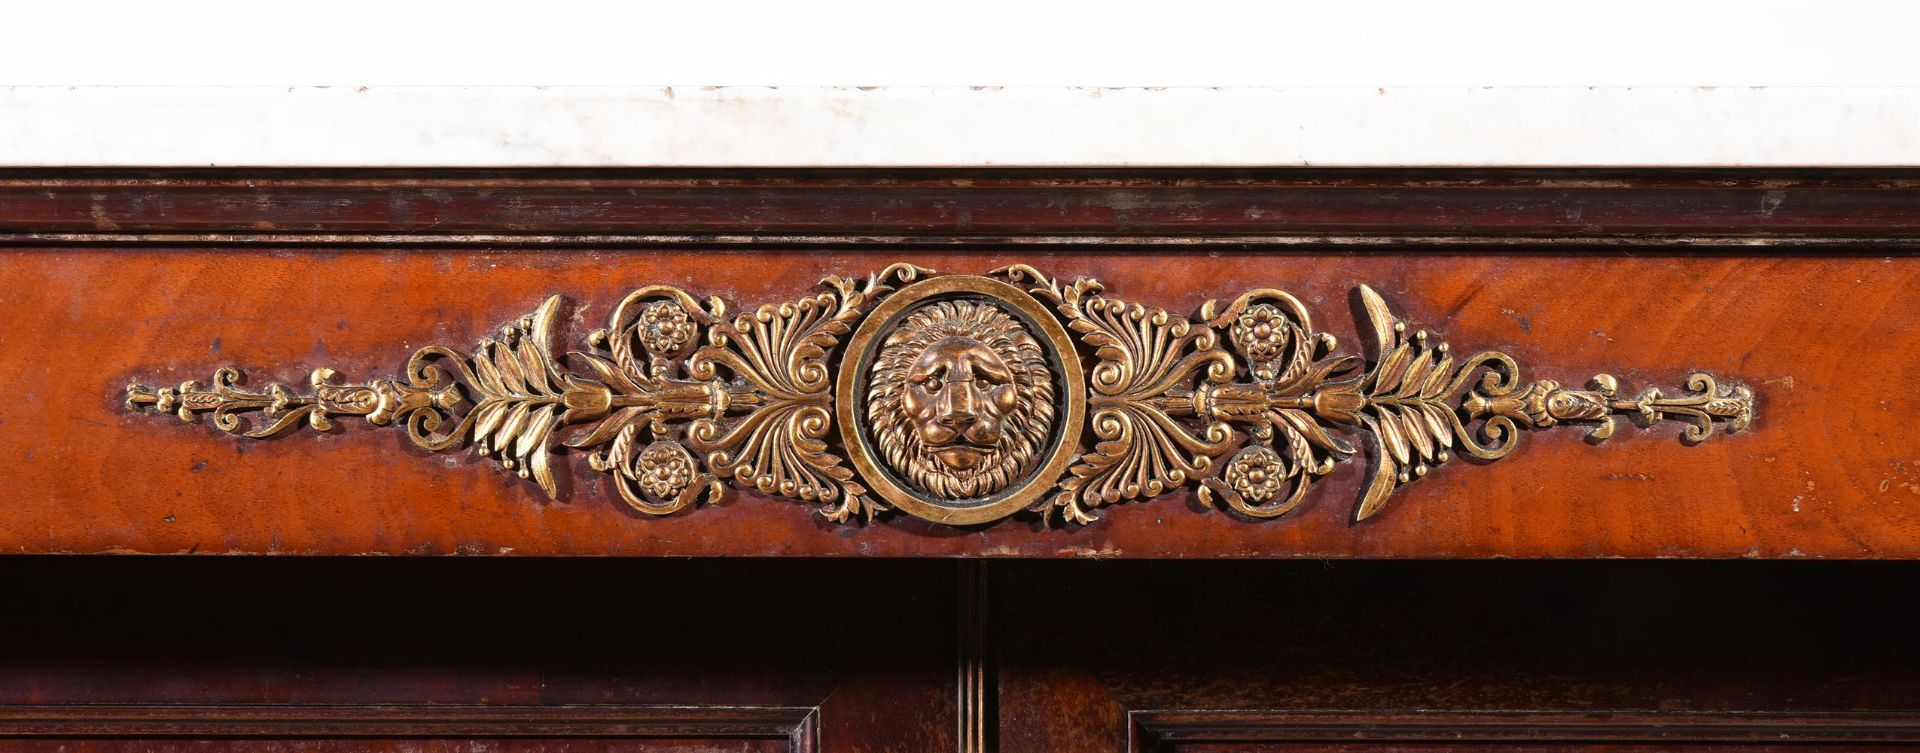 AN EMPIRE MAHOGANY AND ORMOLU MOUNTED SIDE CABINET, STAMPED 'JACOB D. RUE MESLEÉ' - Bild 2 aus 5